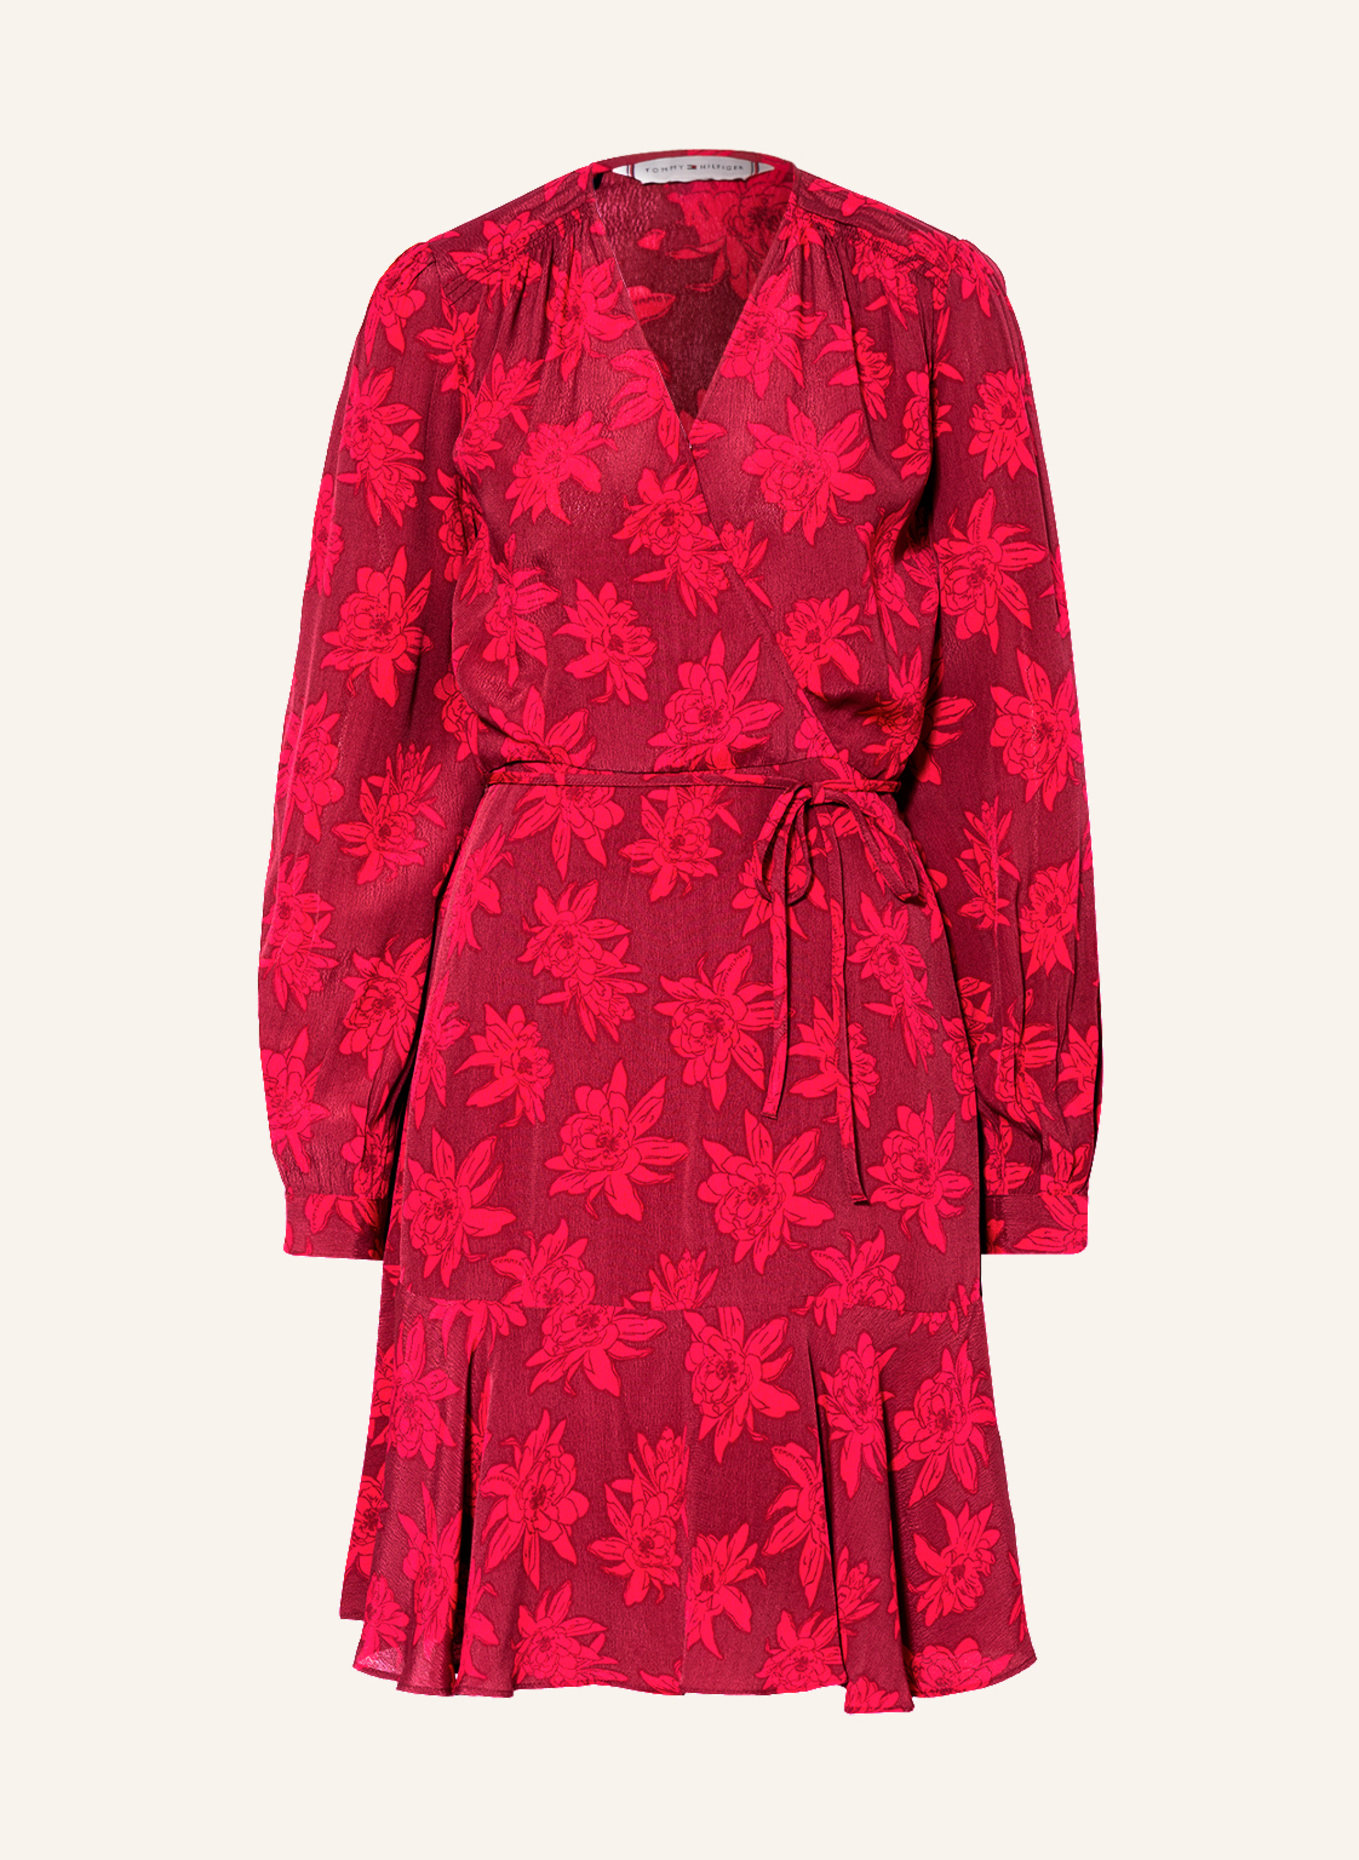 TOMMY HILFIGER Dress in wrap look in red/ dark red